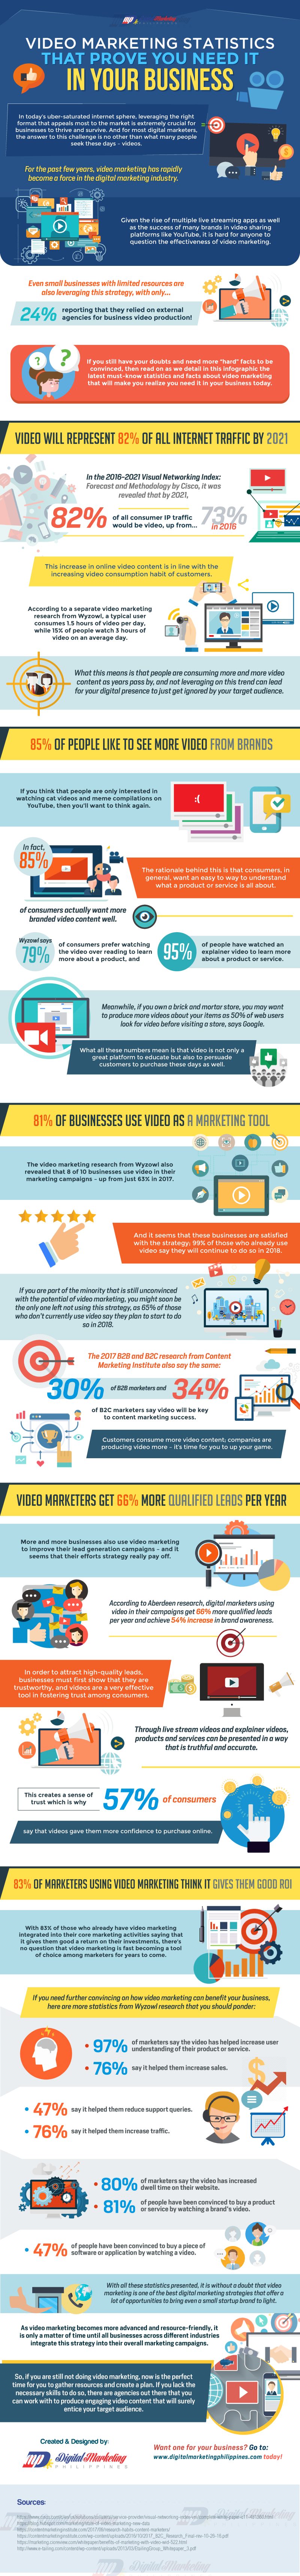 Infographic: Video Marketing Statistics That Prove You Need it in Your Business